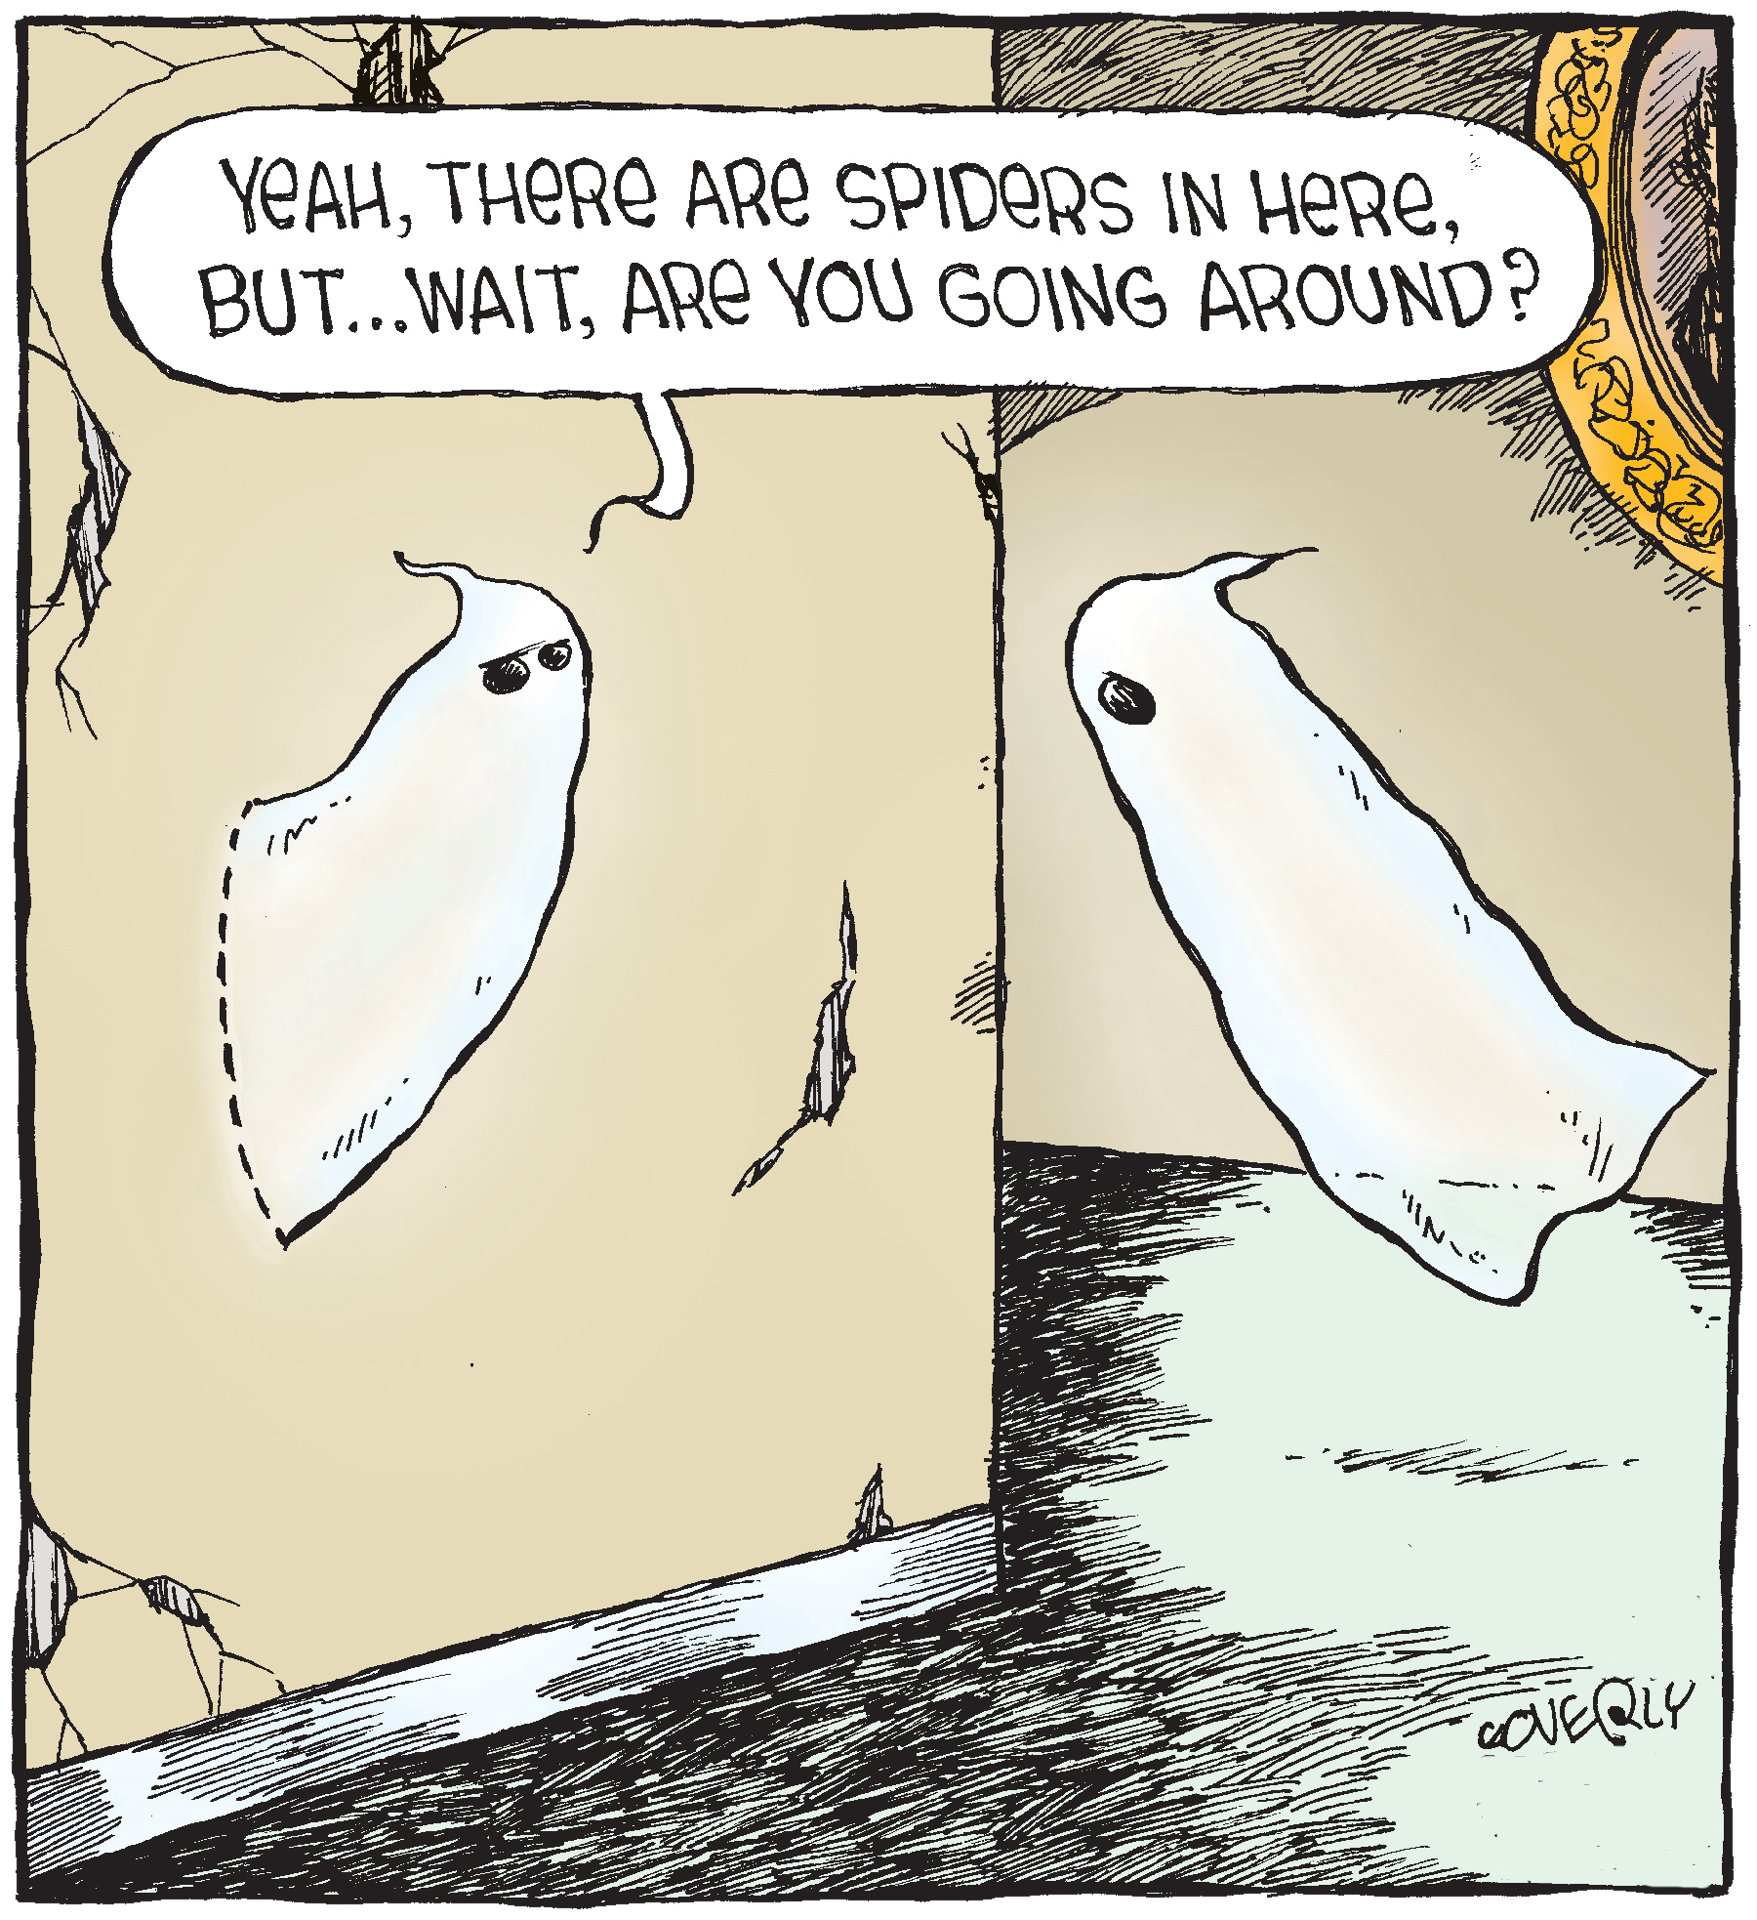 Spackle by Dave Coverly